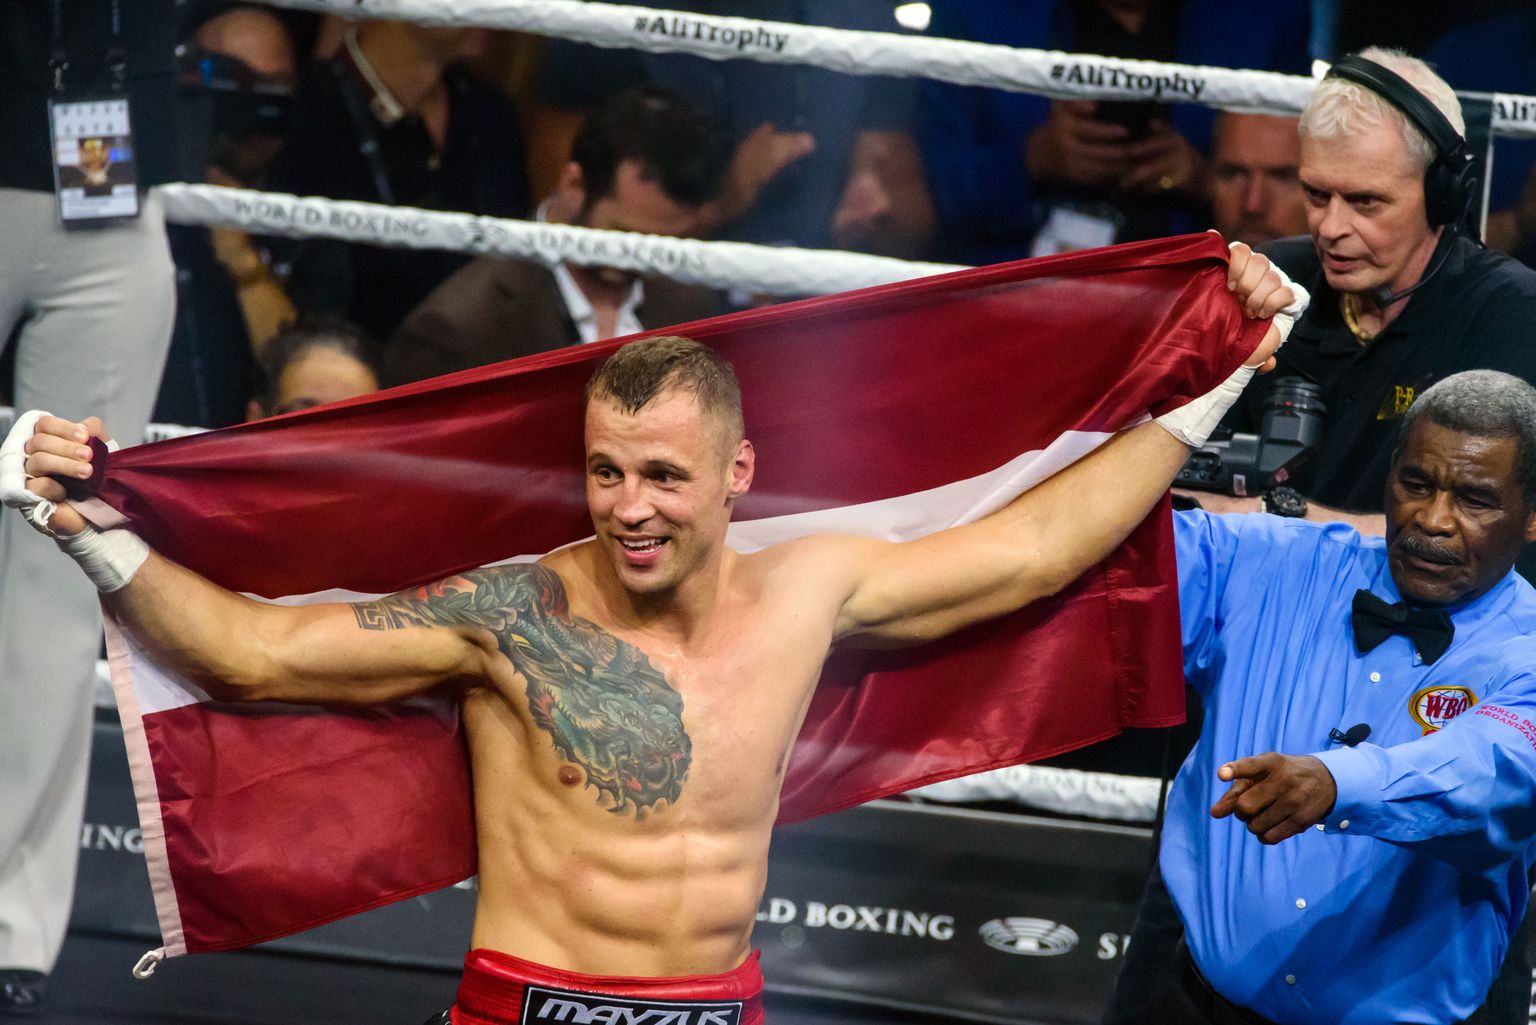 (190616) -- LATVIA, June 16, 2019 (Xinhua) -- Mairis Briedis (L) of Latvia reacts after the World Boxing Super Series cruiserweight division semifinal against Krzysztof Glowacki of Poland, at the Arena Riga in Riga, Latvia, on June 15, 2019. Mairis Briedis  won via knockout. (Xinhua/Edijs Palens) - Edijs Palens -//CHINENOUVELLE_11210145/1906161239/Credit:CHINE NOUVELLE/SIPA/1906161243